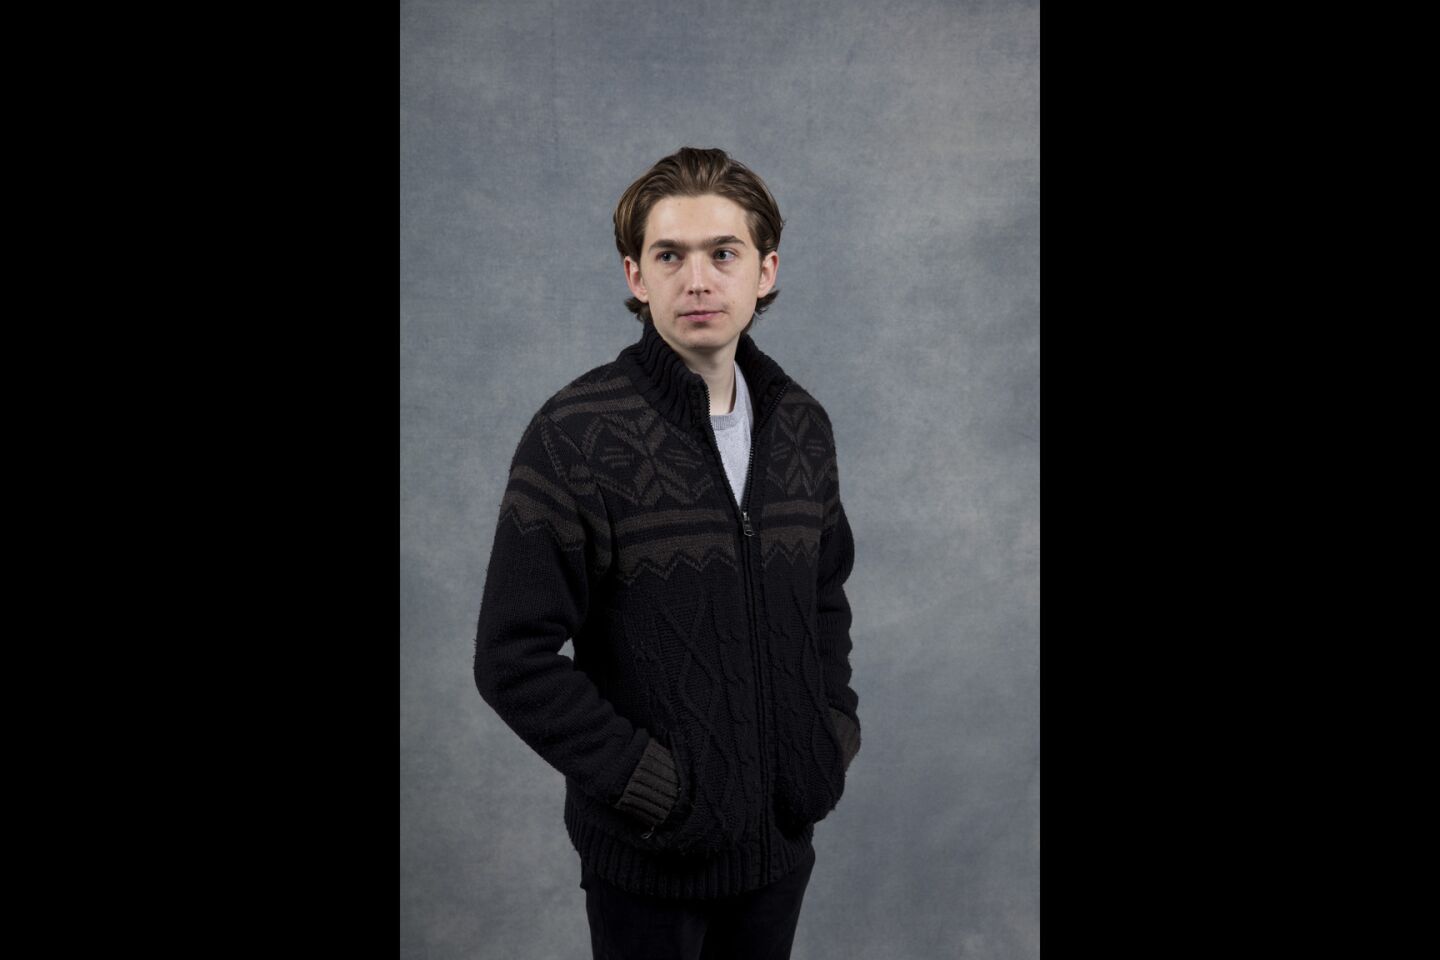 Actor Austin Abrams, from the film, "Puzzle," photographed in the L.A. Times Studio at Chase Sapphire on Main, during the Sundance Film Festival in Park City, Utah, Jan. 22, 2018.